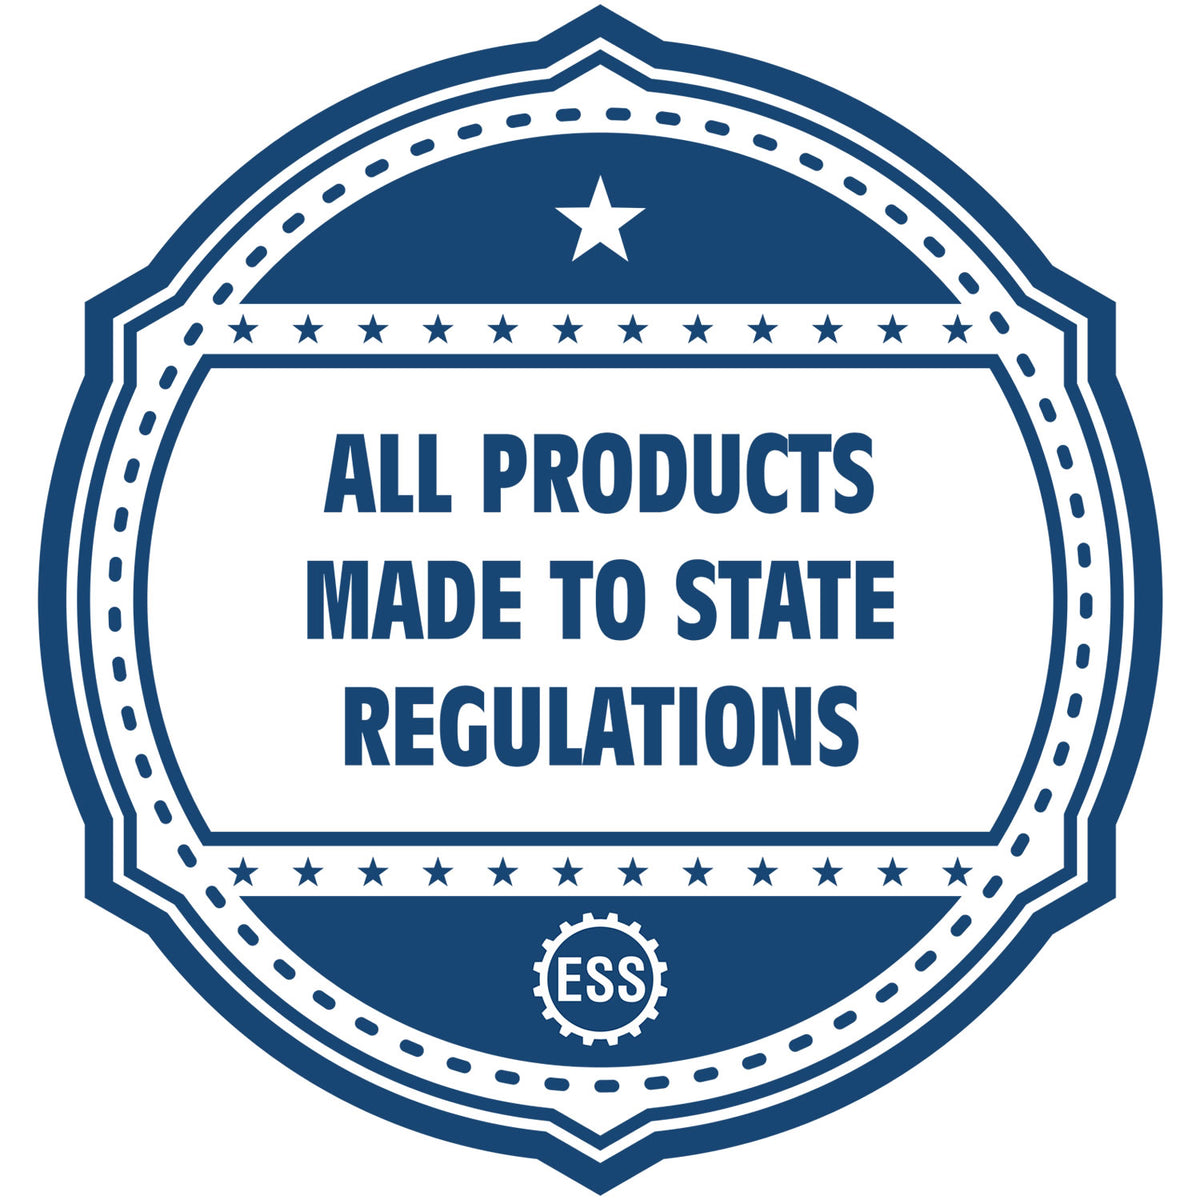 An icon or badge element for the New York Engineer Desk Seal showing that this product is made in compliance with state regulations.